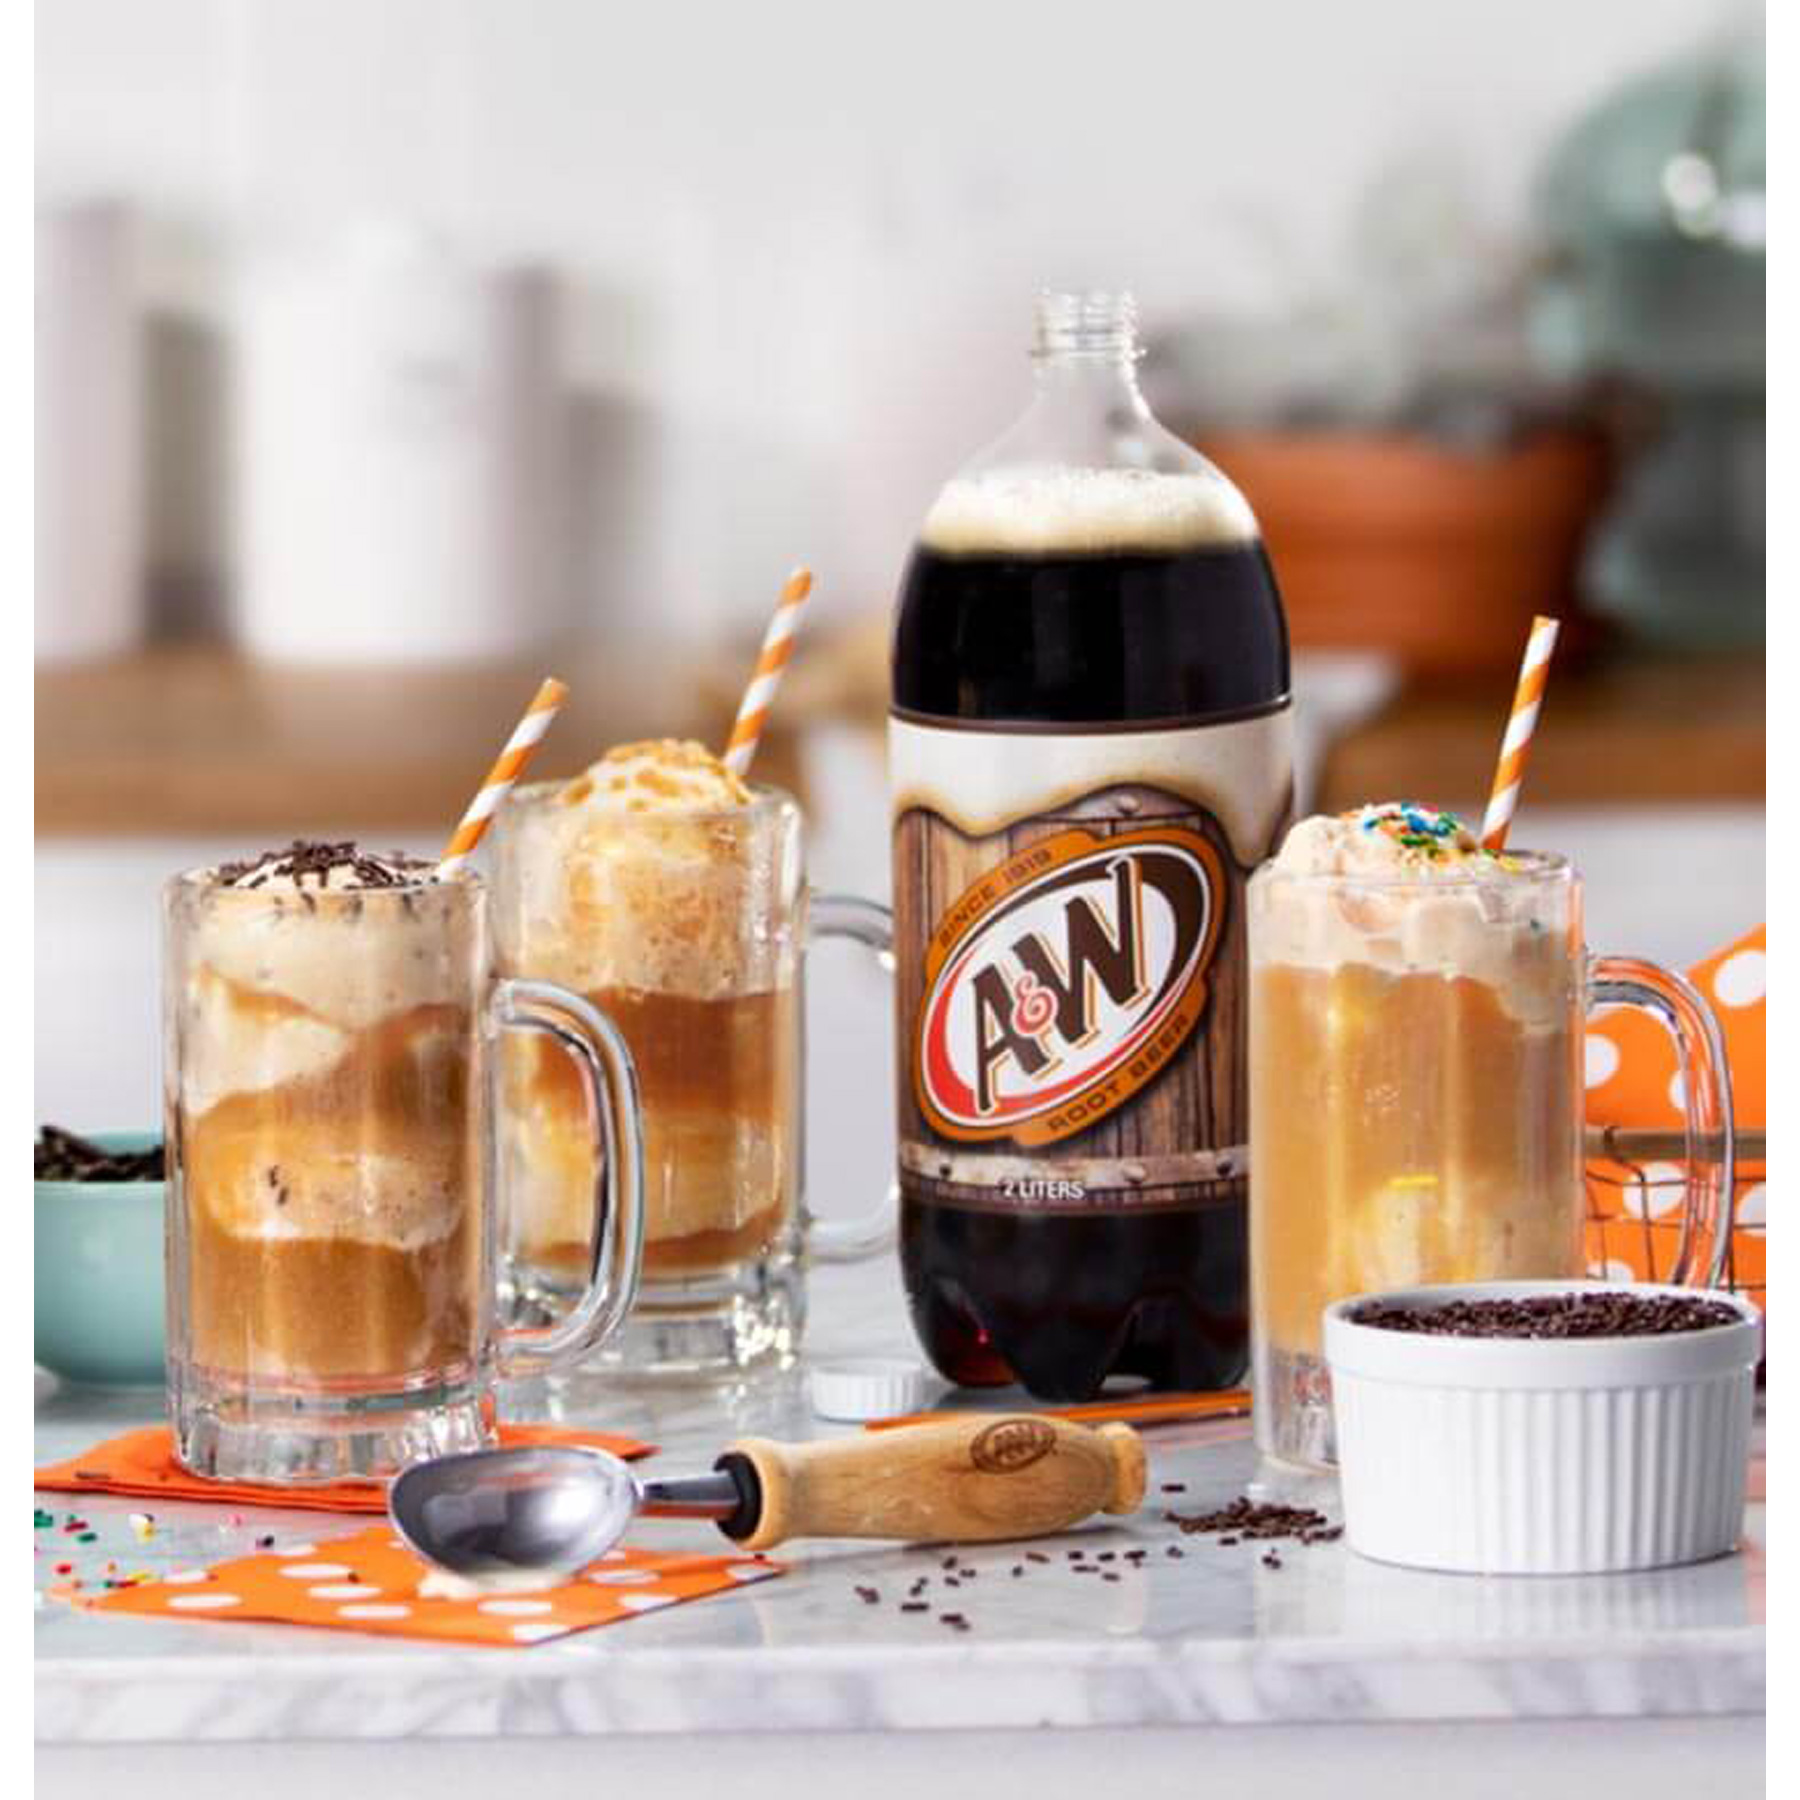 FREE A&W Root Beer!  HURRY!!  Take the pledge!